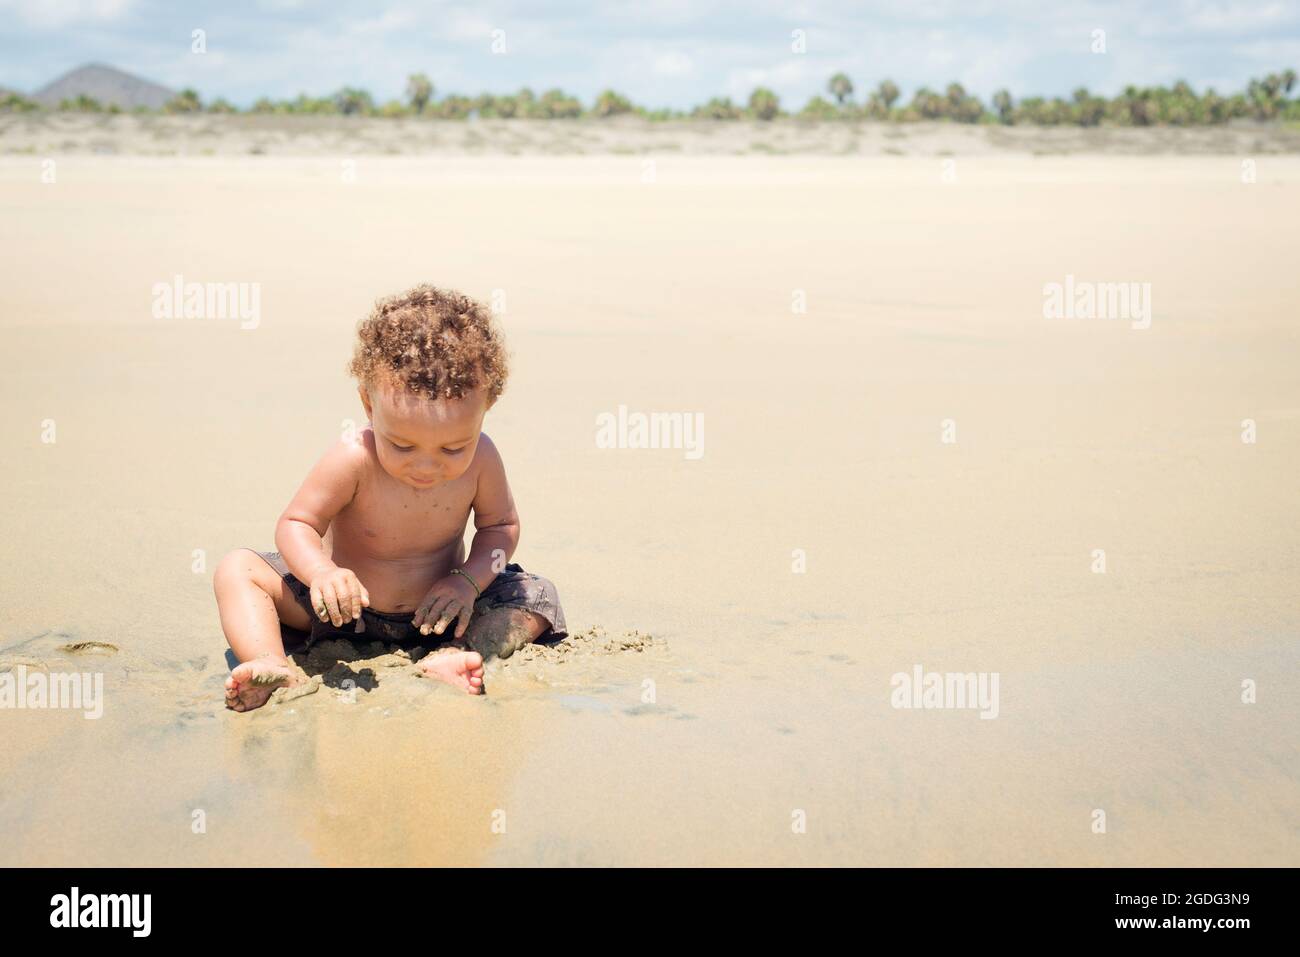 Toddler playing in sand on beach Stock Photo